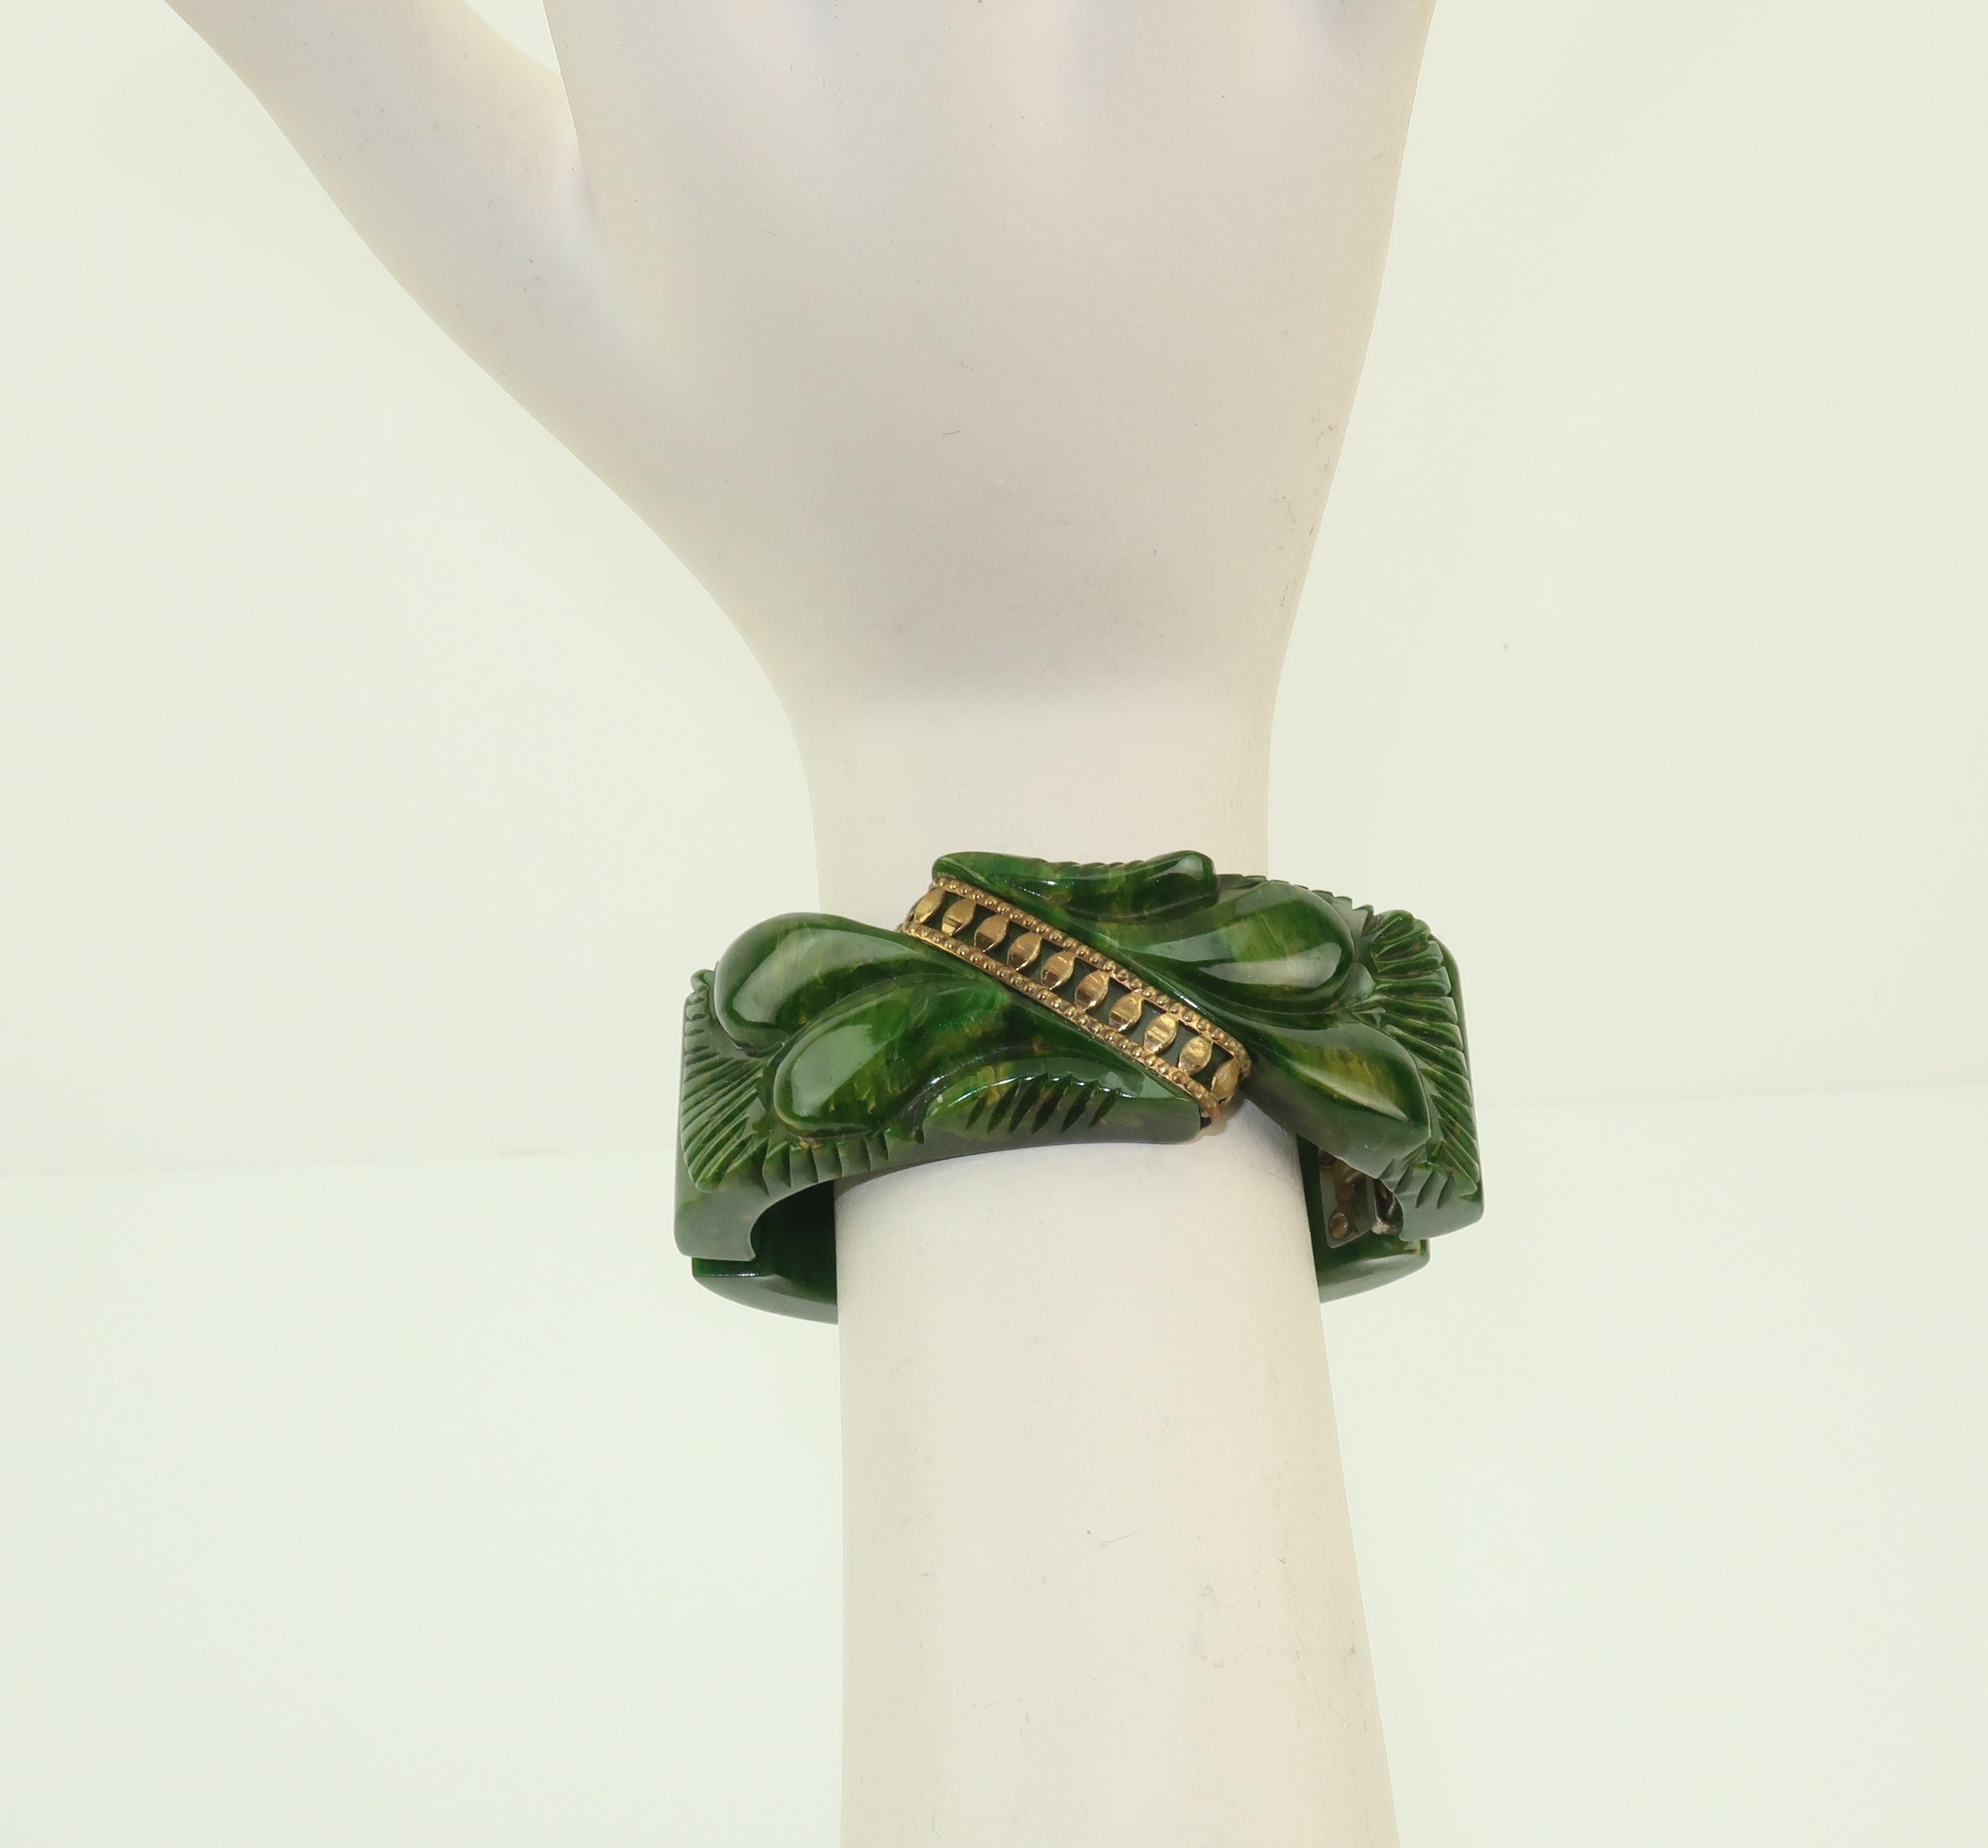 Glorious green!  A C.1940 marbled look green bakelite bracelet with an exotic carved motif accented with a gold tone detail.  The clamper style sports a hinge at the side and the oval silhouette gives the bracelet a fitted look perfect for